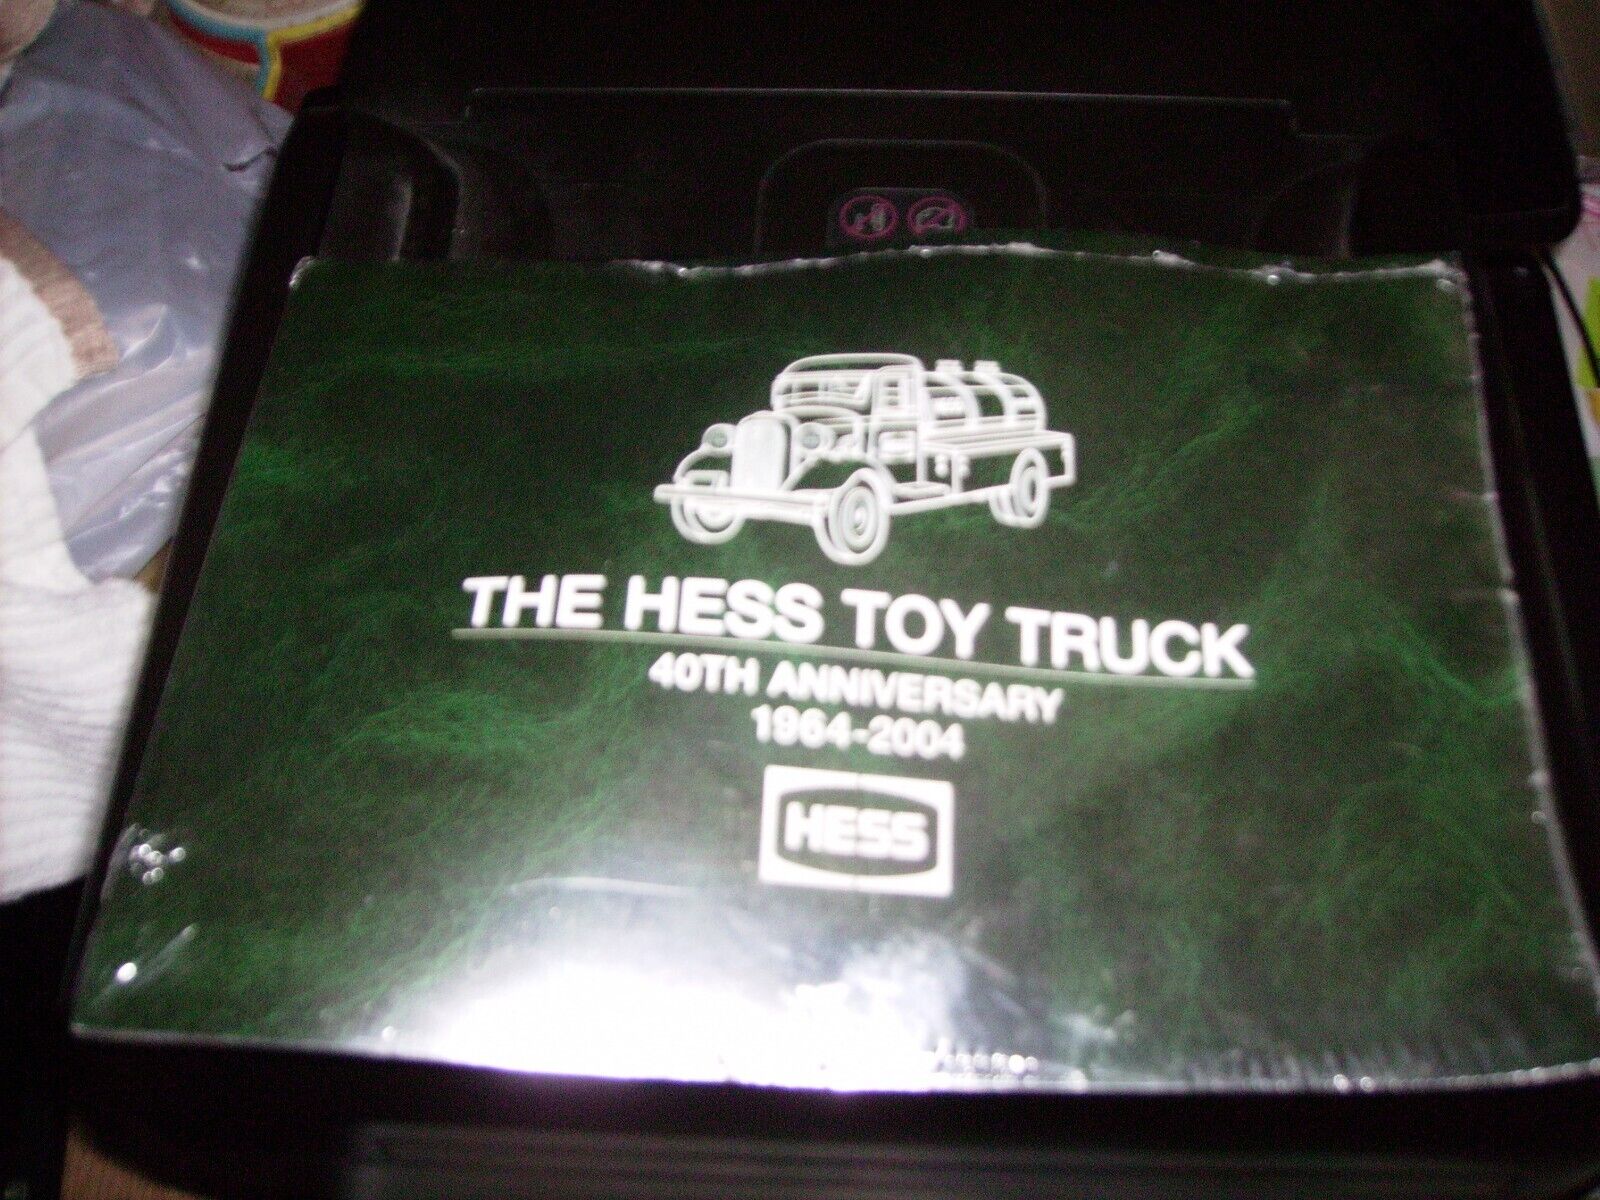 Hess Toy Truck 40TH Anniversary Book 1964-2004